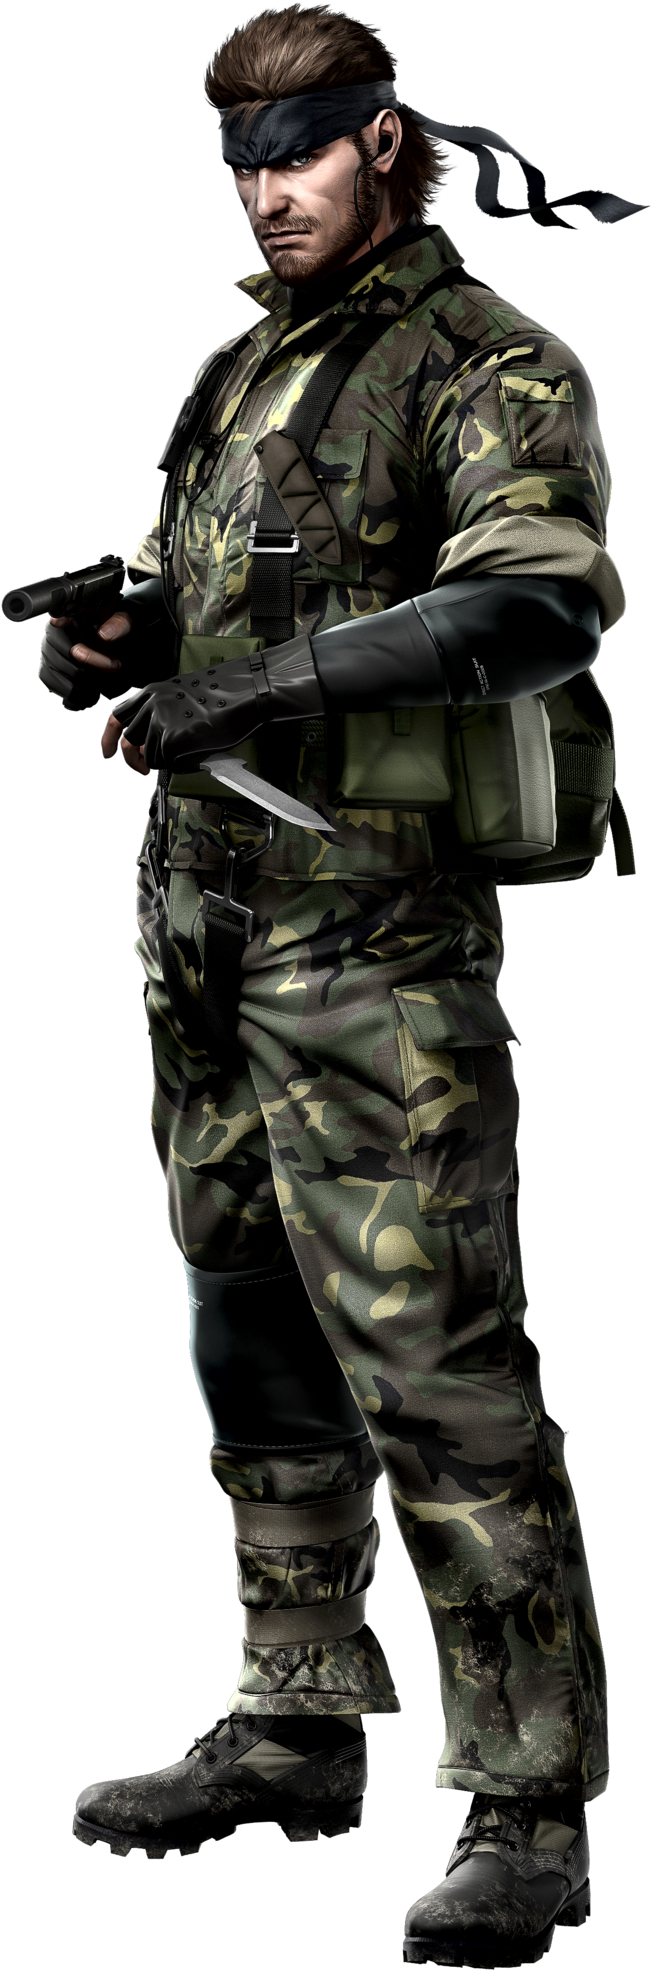 Metal Gear Solid 3 Snake Eater PNG HD Photos